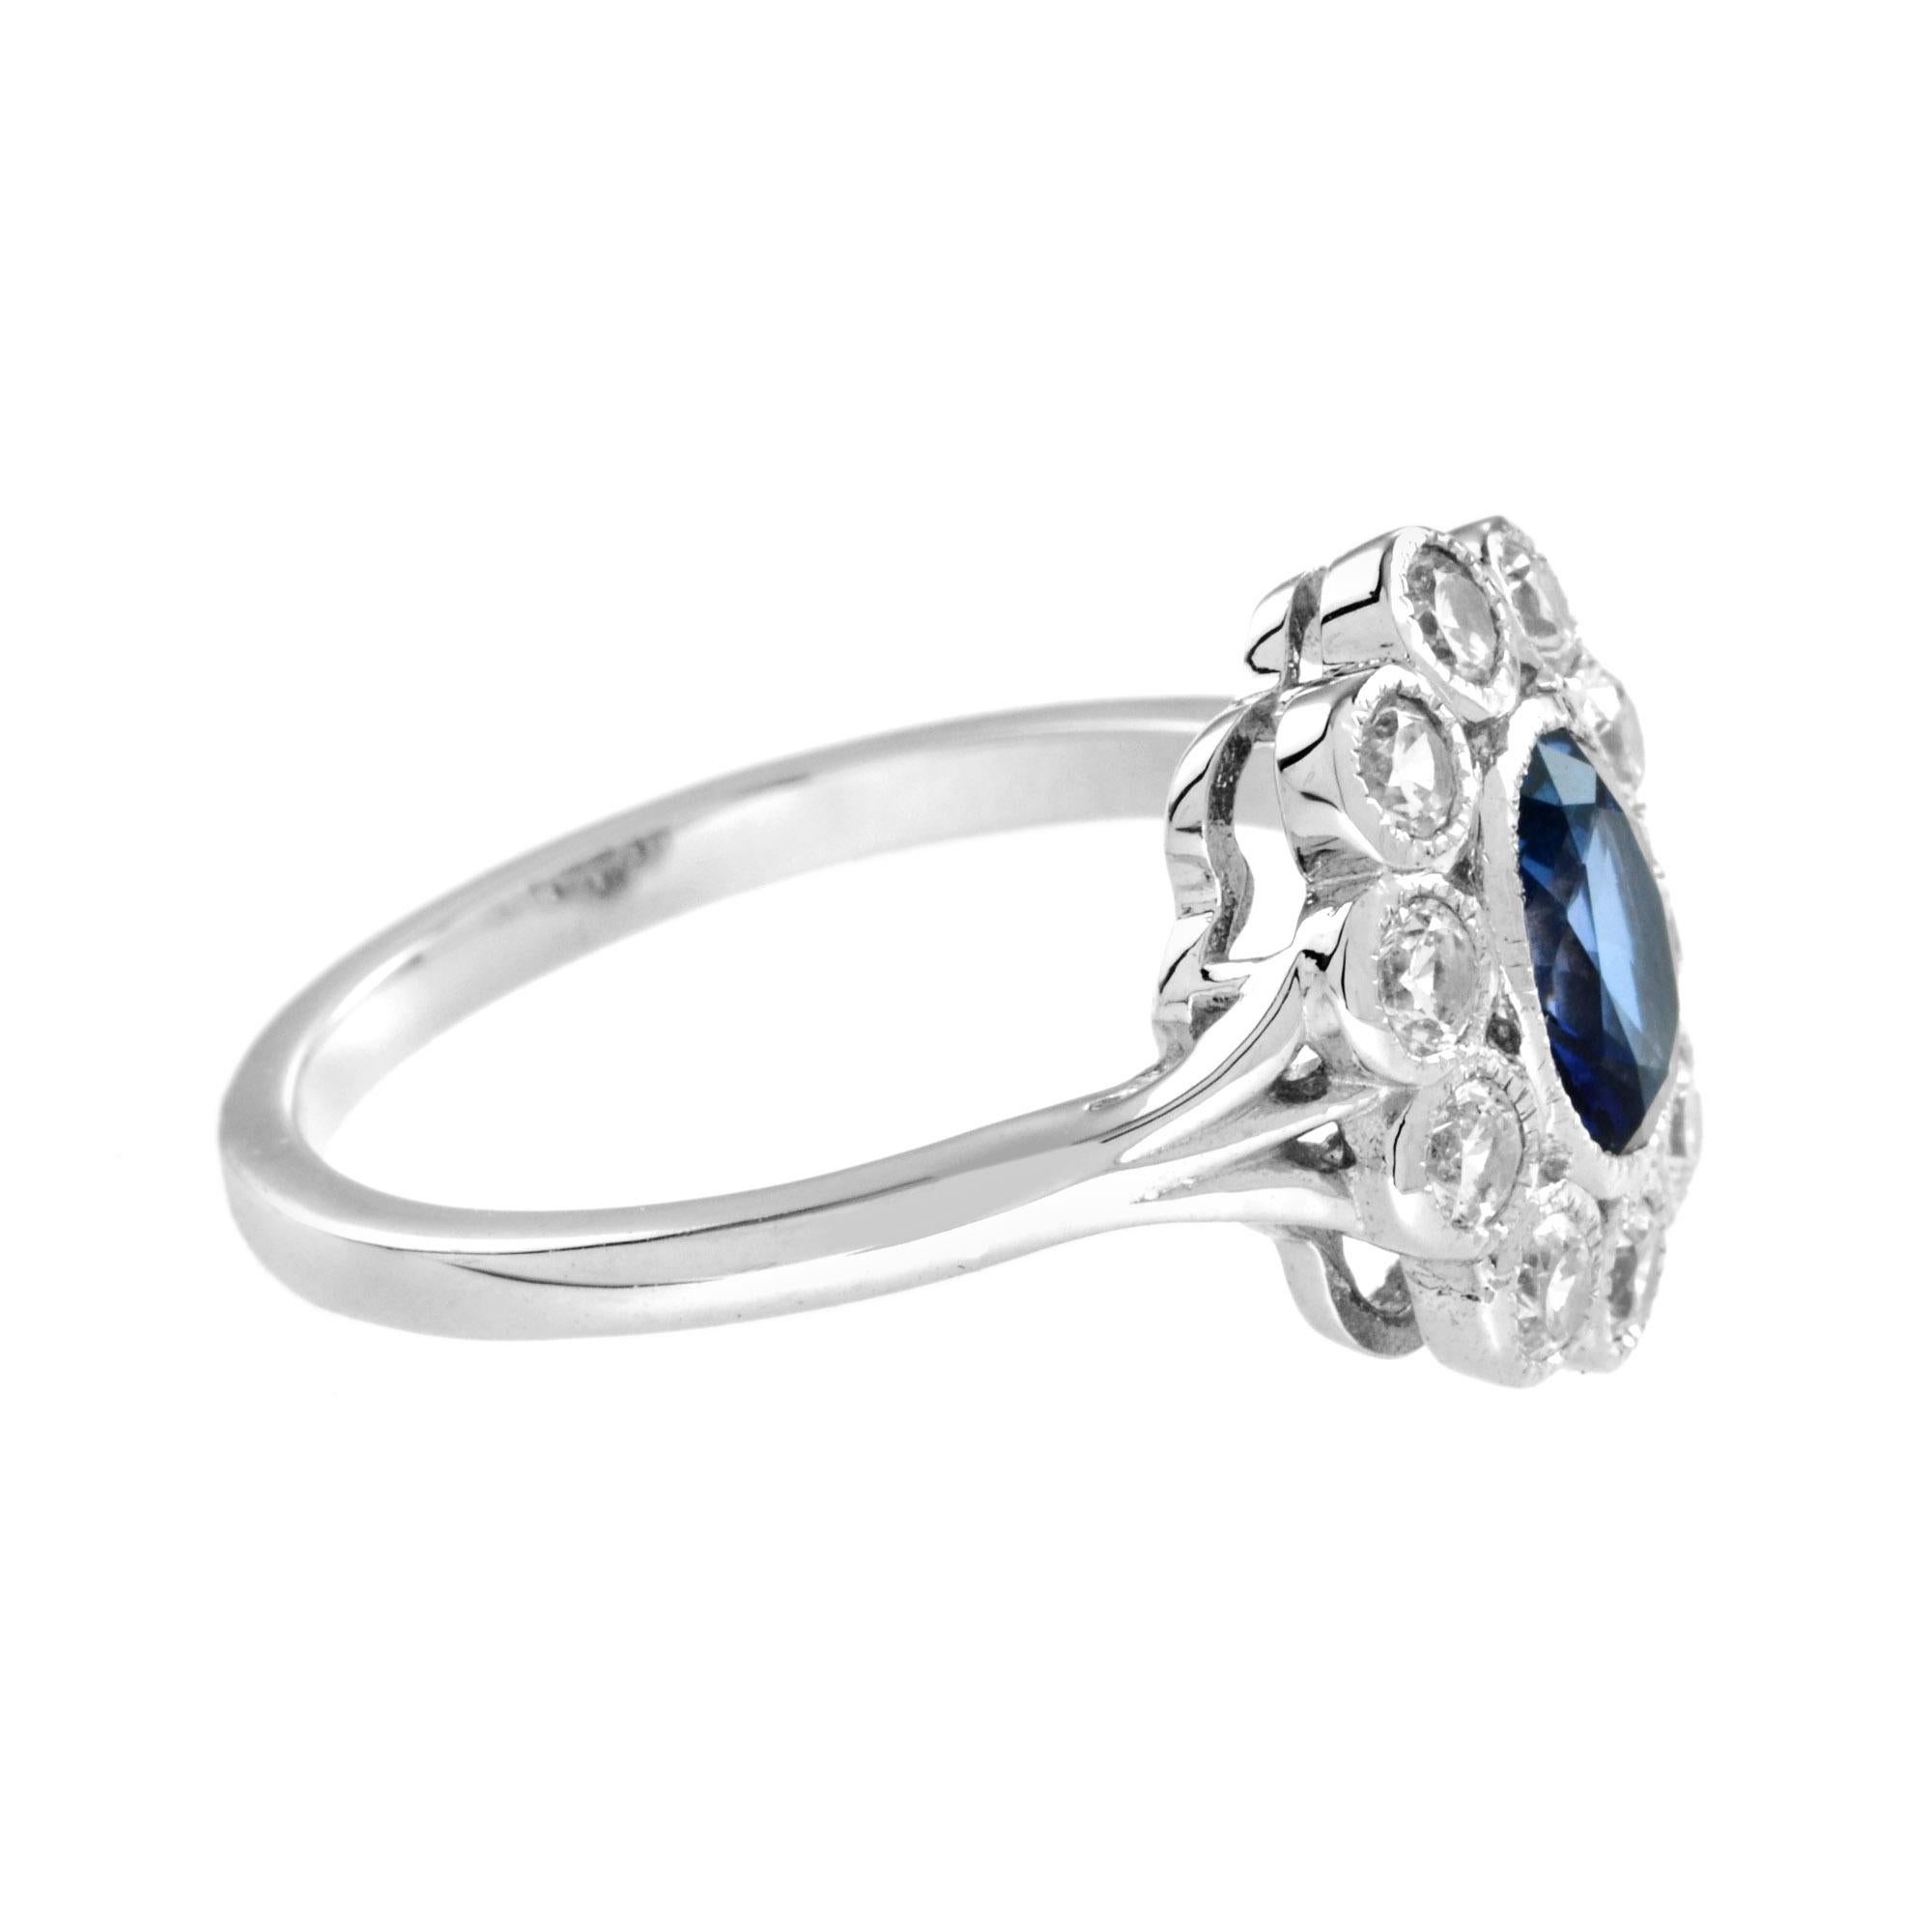 For Sale:  Classic Ceylon Sapphire and Diamond Cluster Ring in 18K White Gold 3